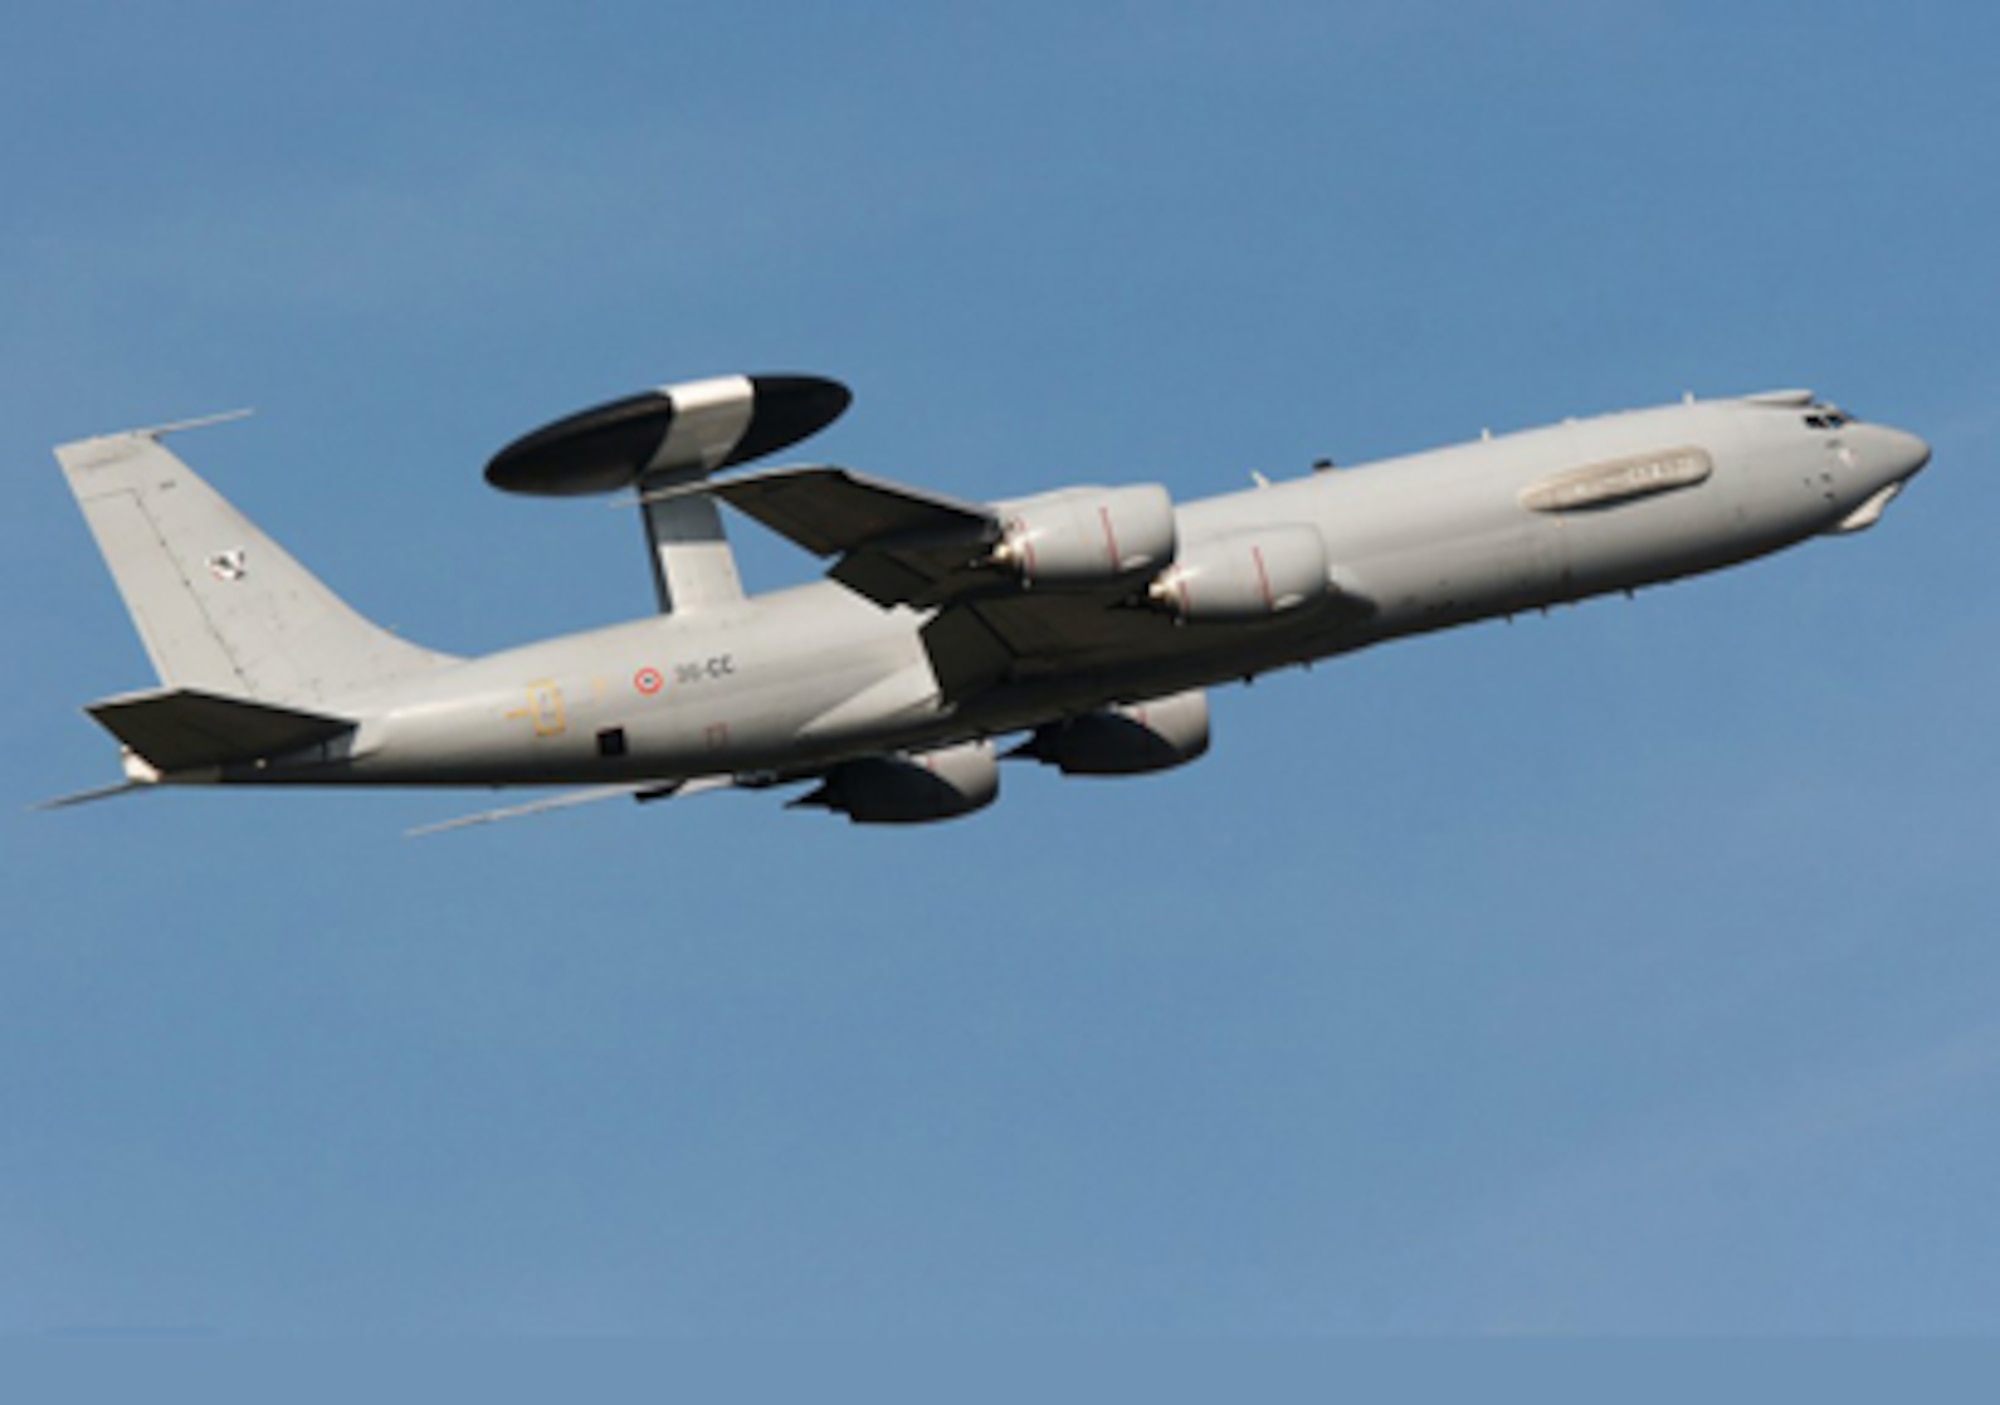 French AWACS E-3F aircraft, like the one in flight here, will soon be improved.  The Electronic Systems Center recently awarded a contract to upgrade the French AWACS fleet with more modern capabilities. (Courtesy photo)